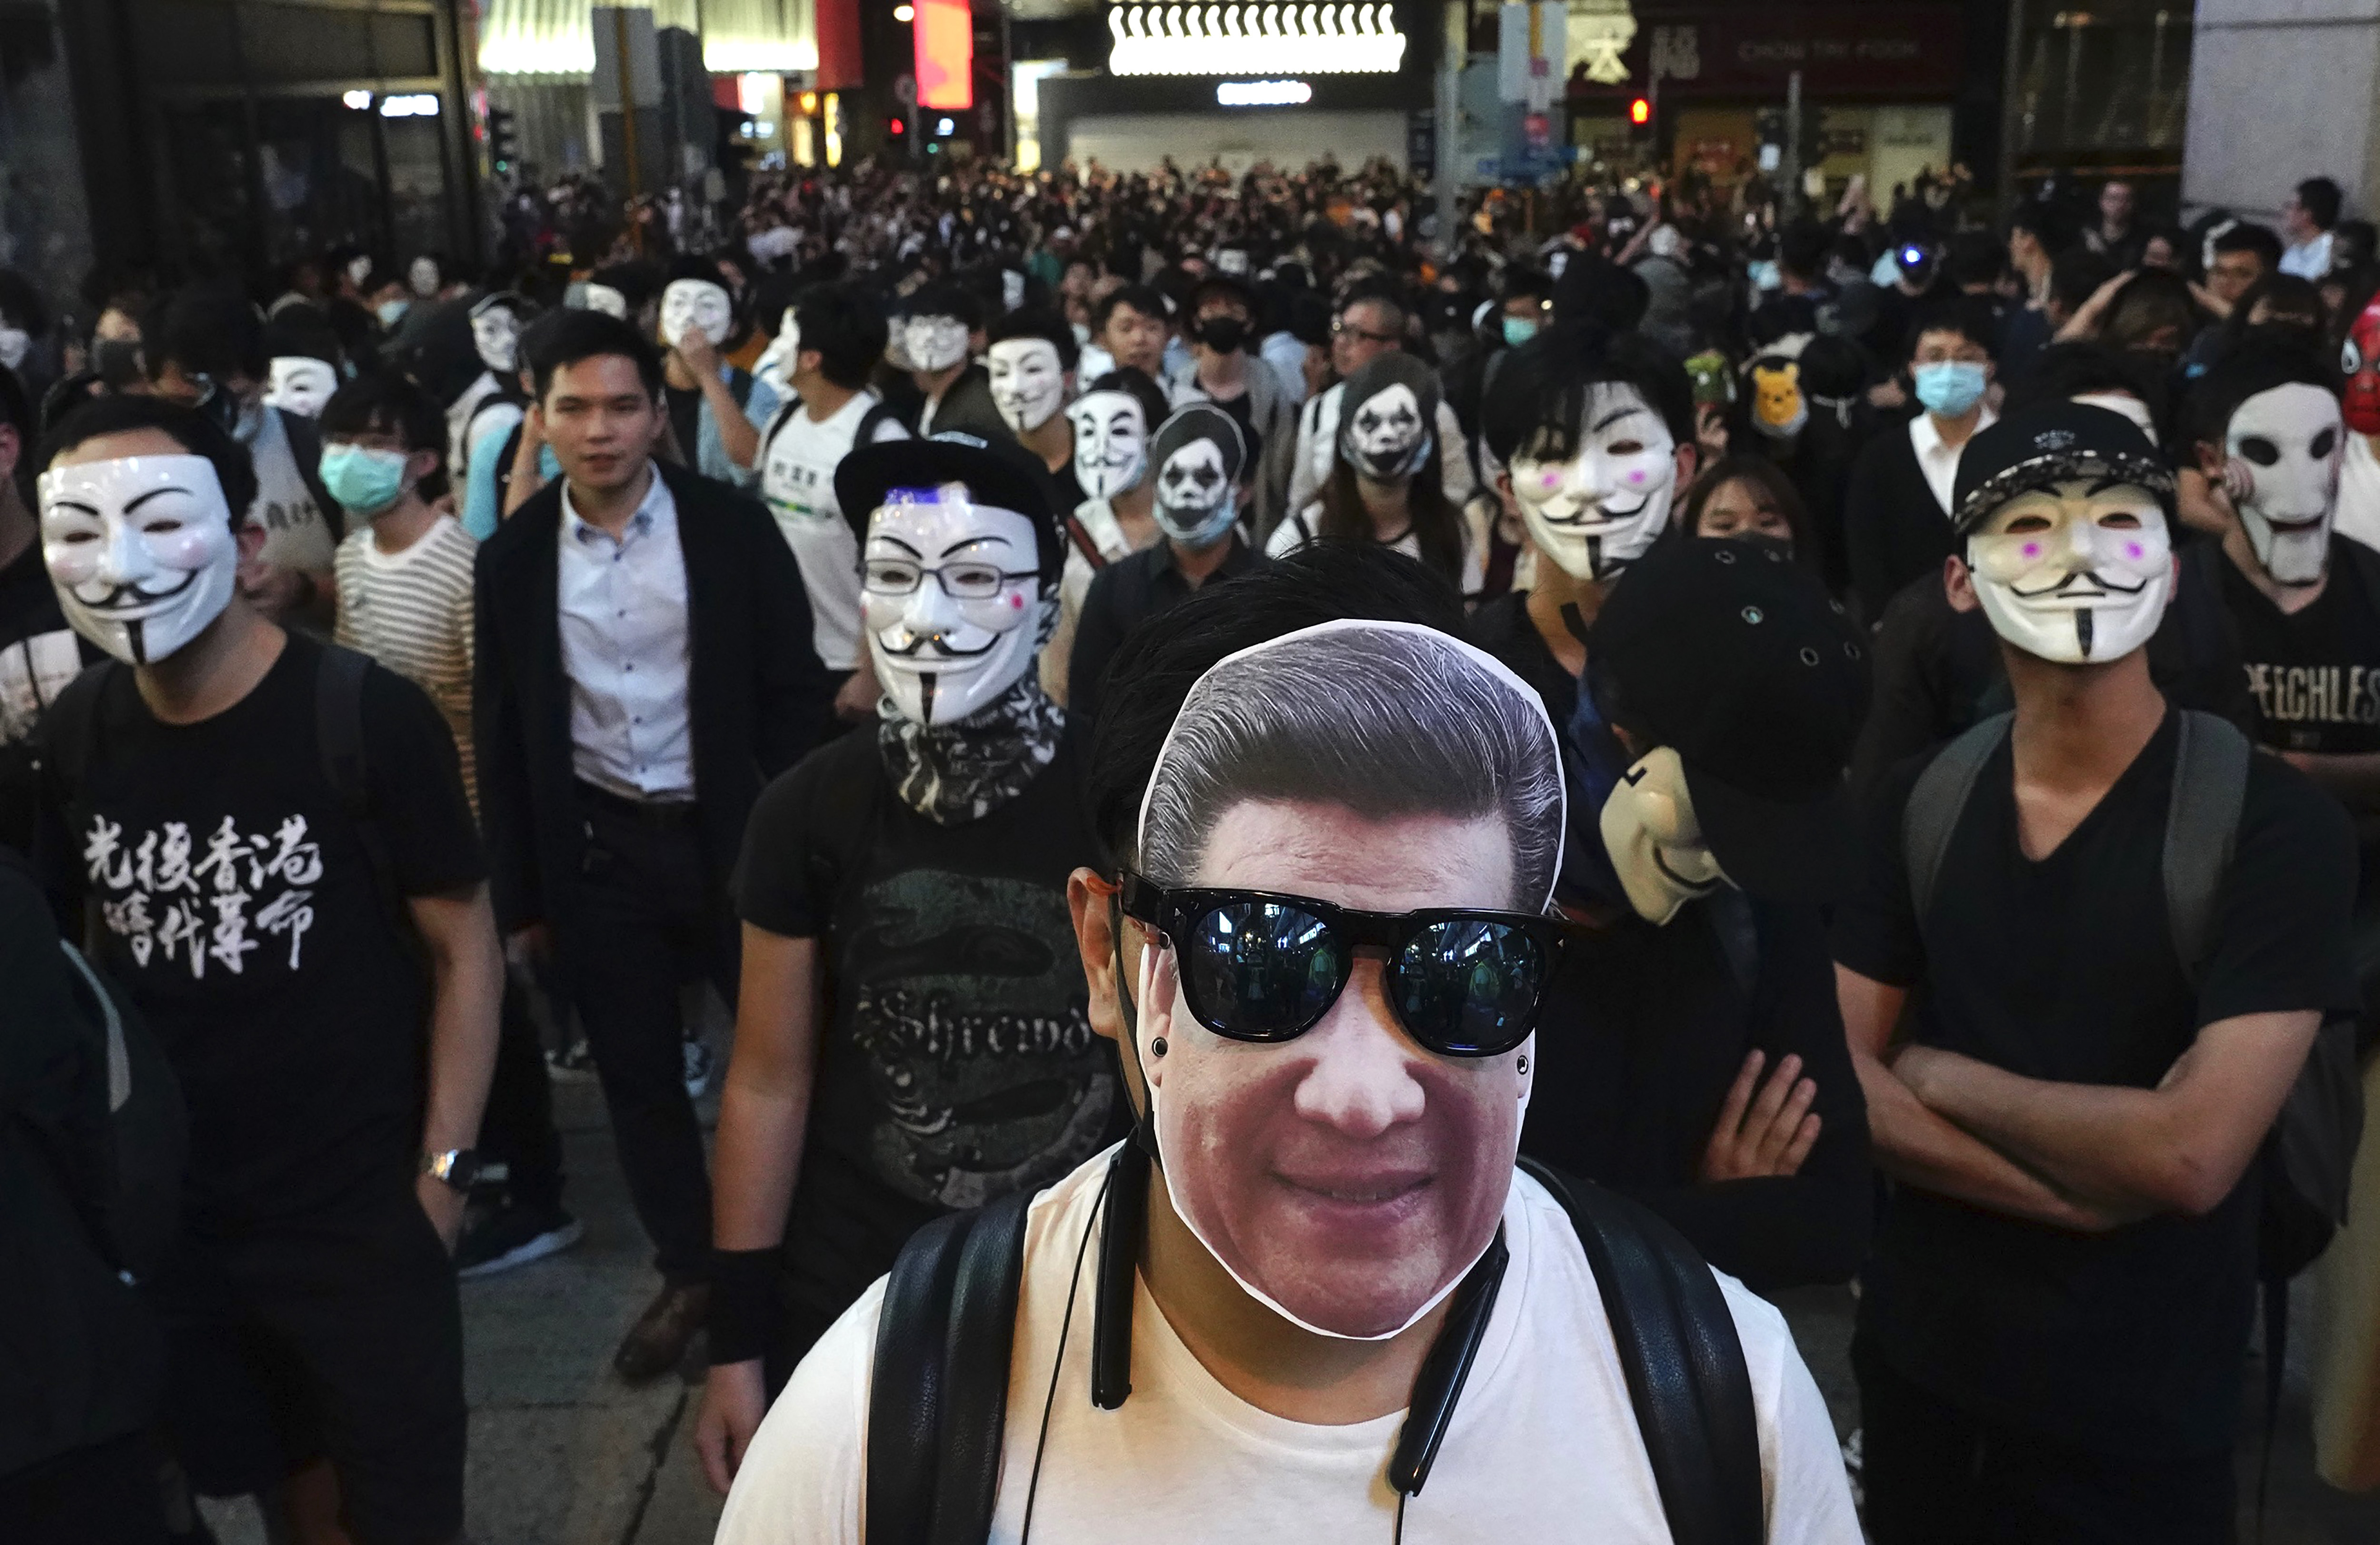 A man wearing a mask of Chinese President Xi Jinping stands with peole wearing Guy Fawkes masks on a street in Hong Kong, Thursday, Oct. 31, 2019. Hong Kong authorities are bracing as pro-democracy protesters urged people on Thursday to celebrate Halloween by wearing masks on a march in defiance of a government ban on face coverings. (AP Photo/Vincent Yu)